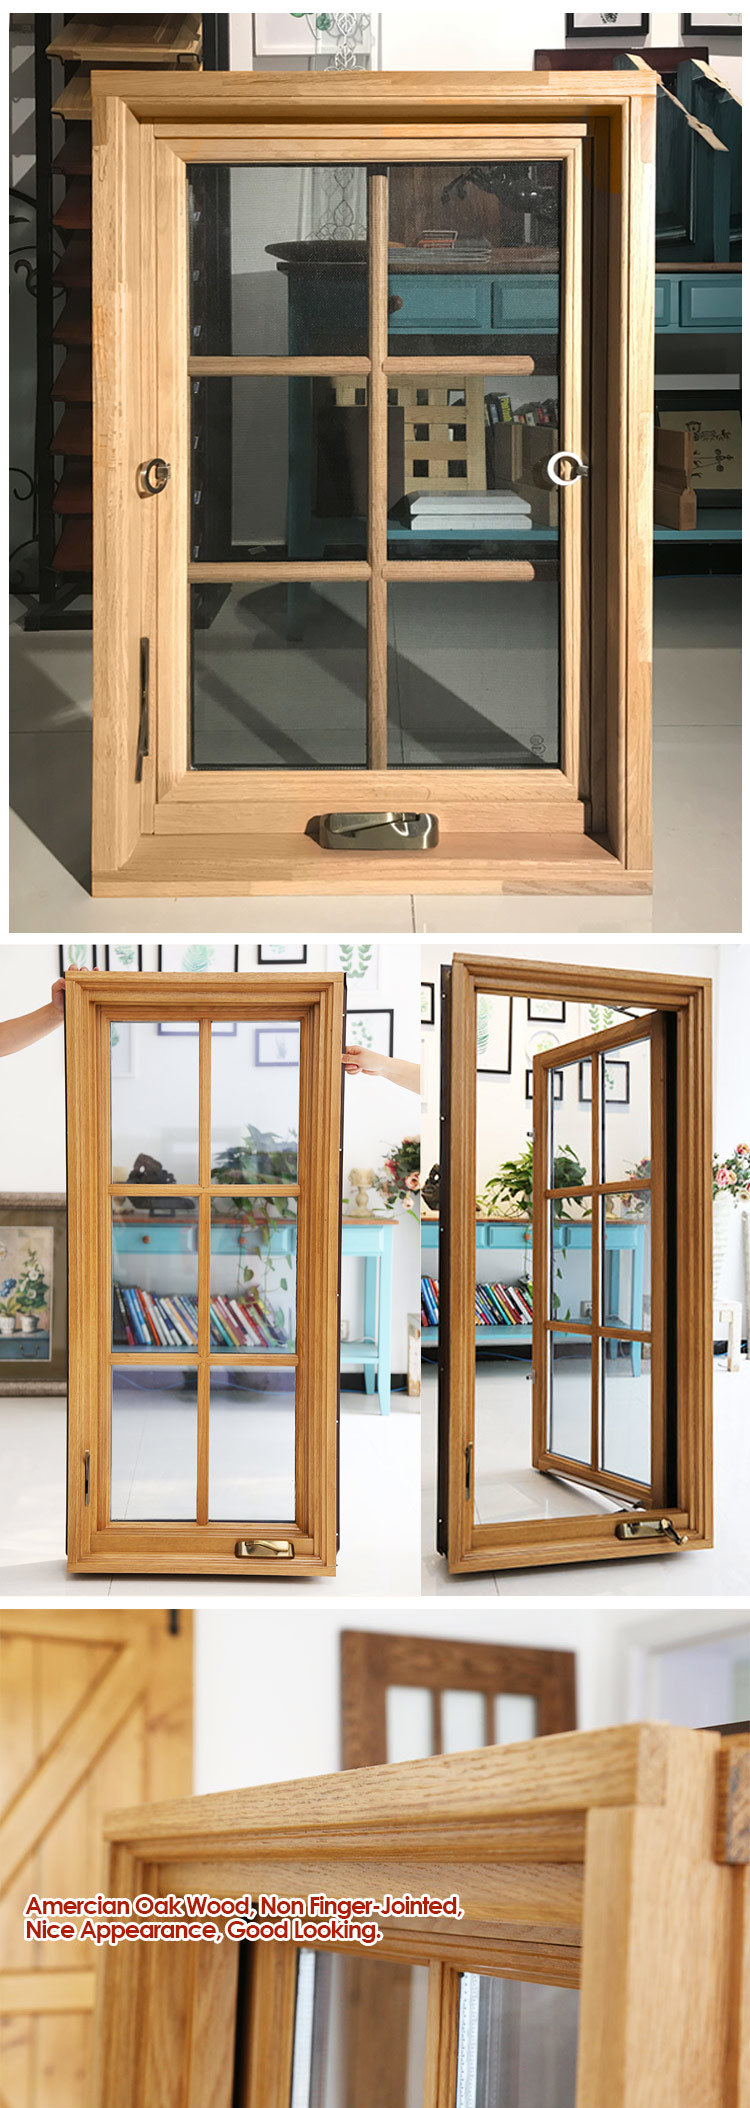 American Style Hand-Cranked Window with Truth Crank Handle for Kitchen Window